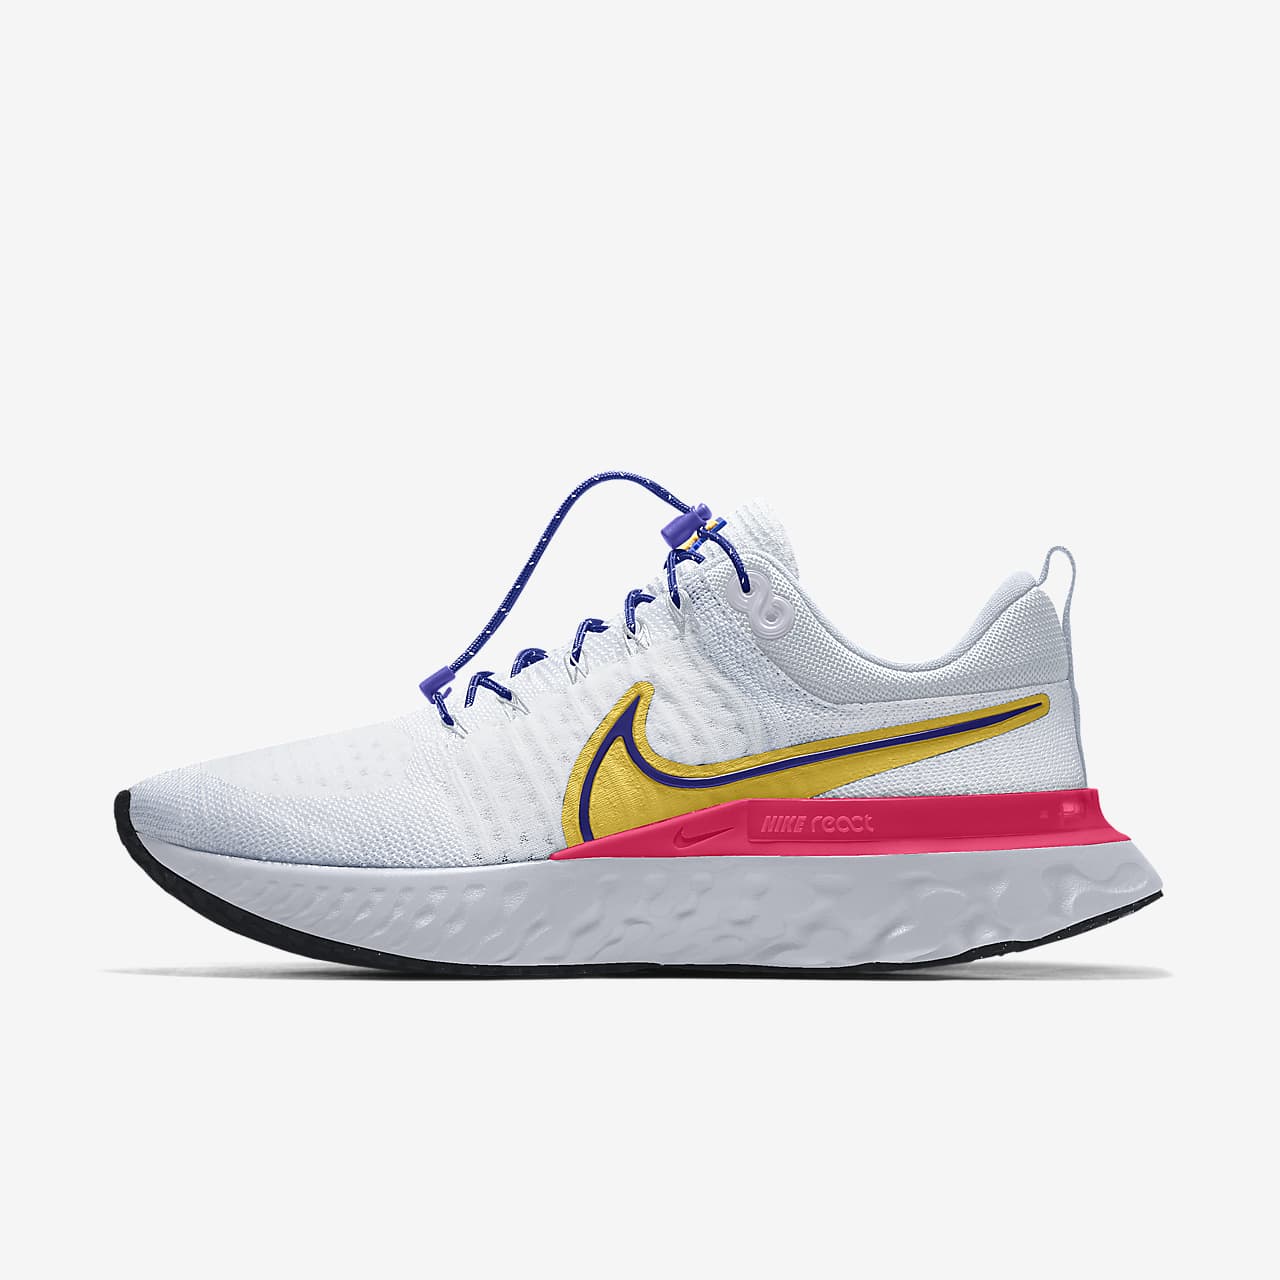 Chaussure de running sur route Nike React Infinity Run Flyknit 2 By You pour Femme